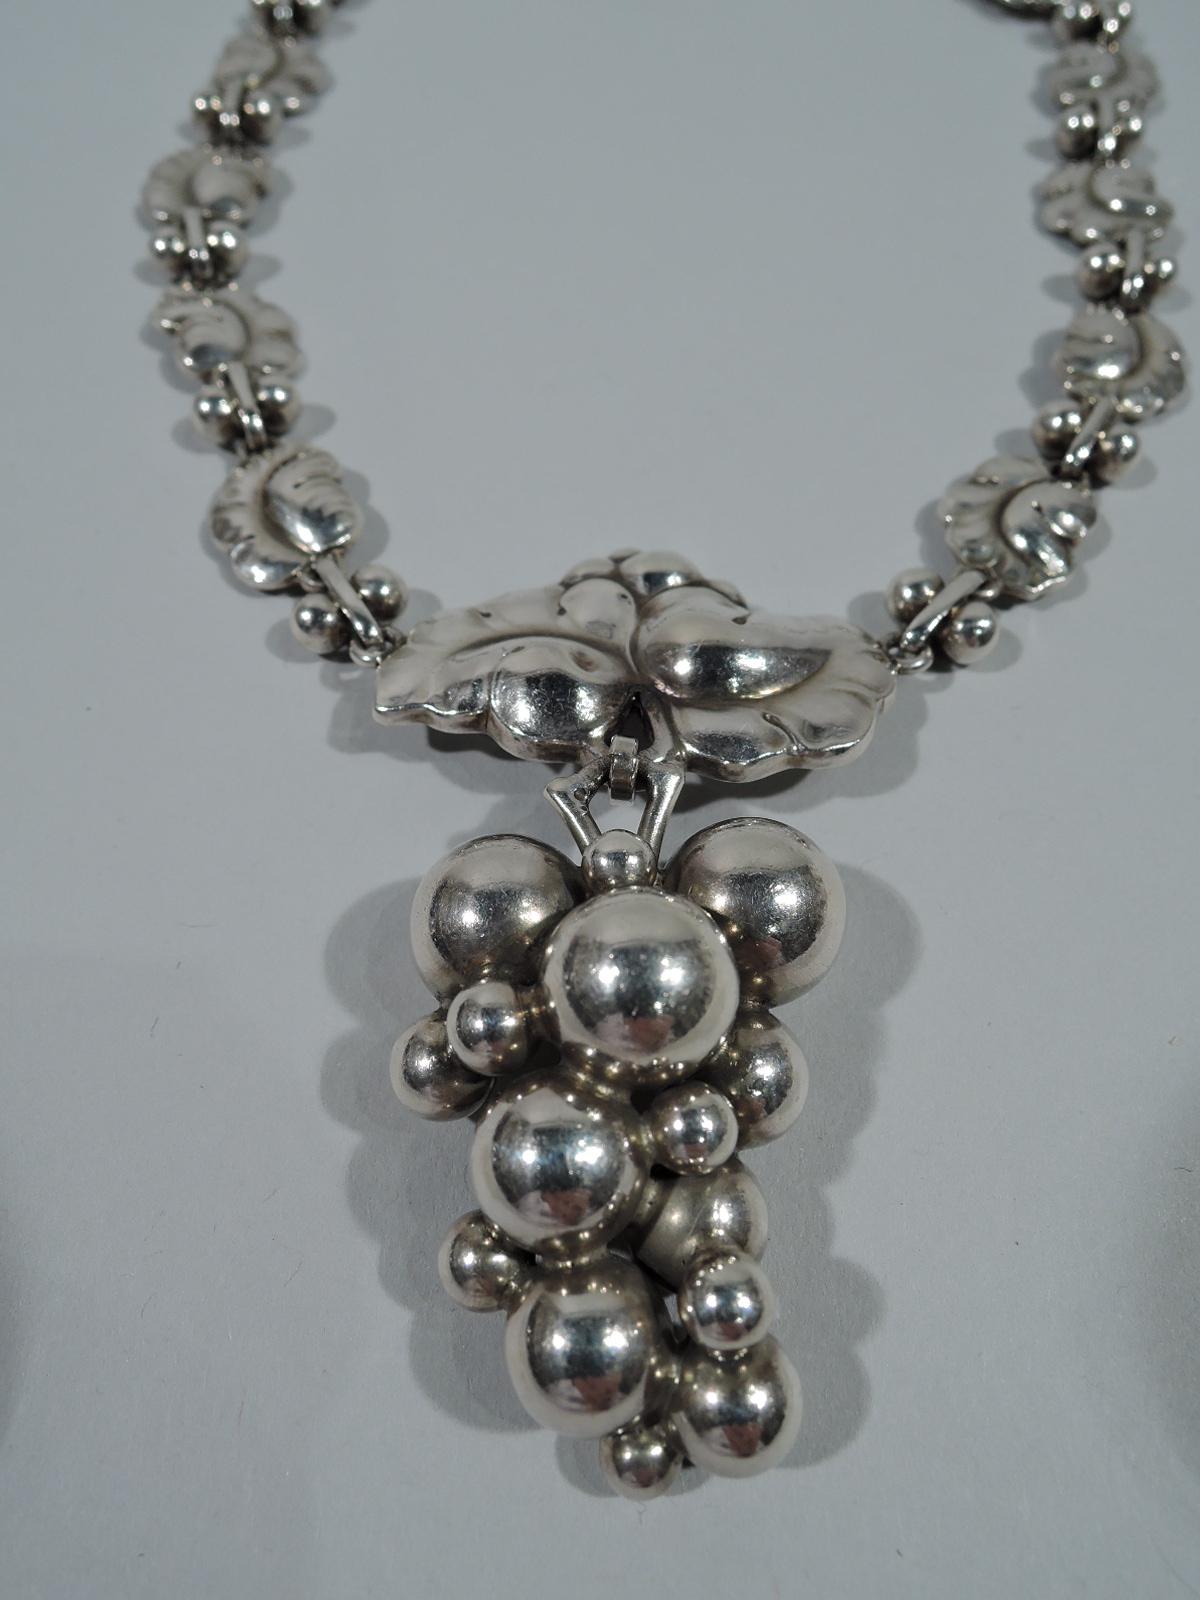 Beautiful sterling silver necklace. Made by Georg Jensen in Copenhagen. Chain comprises leaves joined by links with double balls. Large central leaf with pendant grape bunch – a classic Jensen motif. Postwar hallmark includes no. 96.  